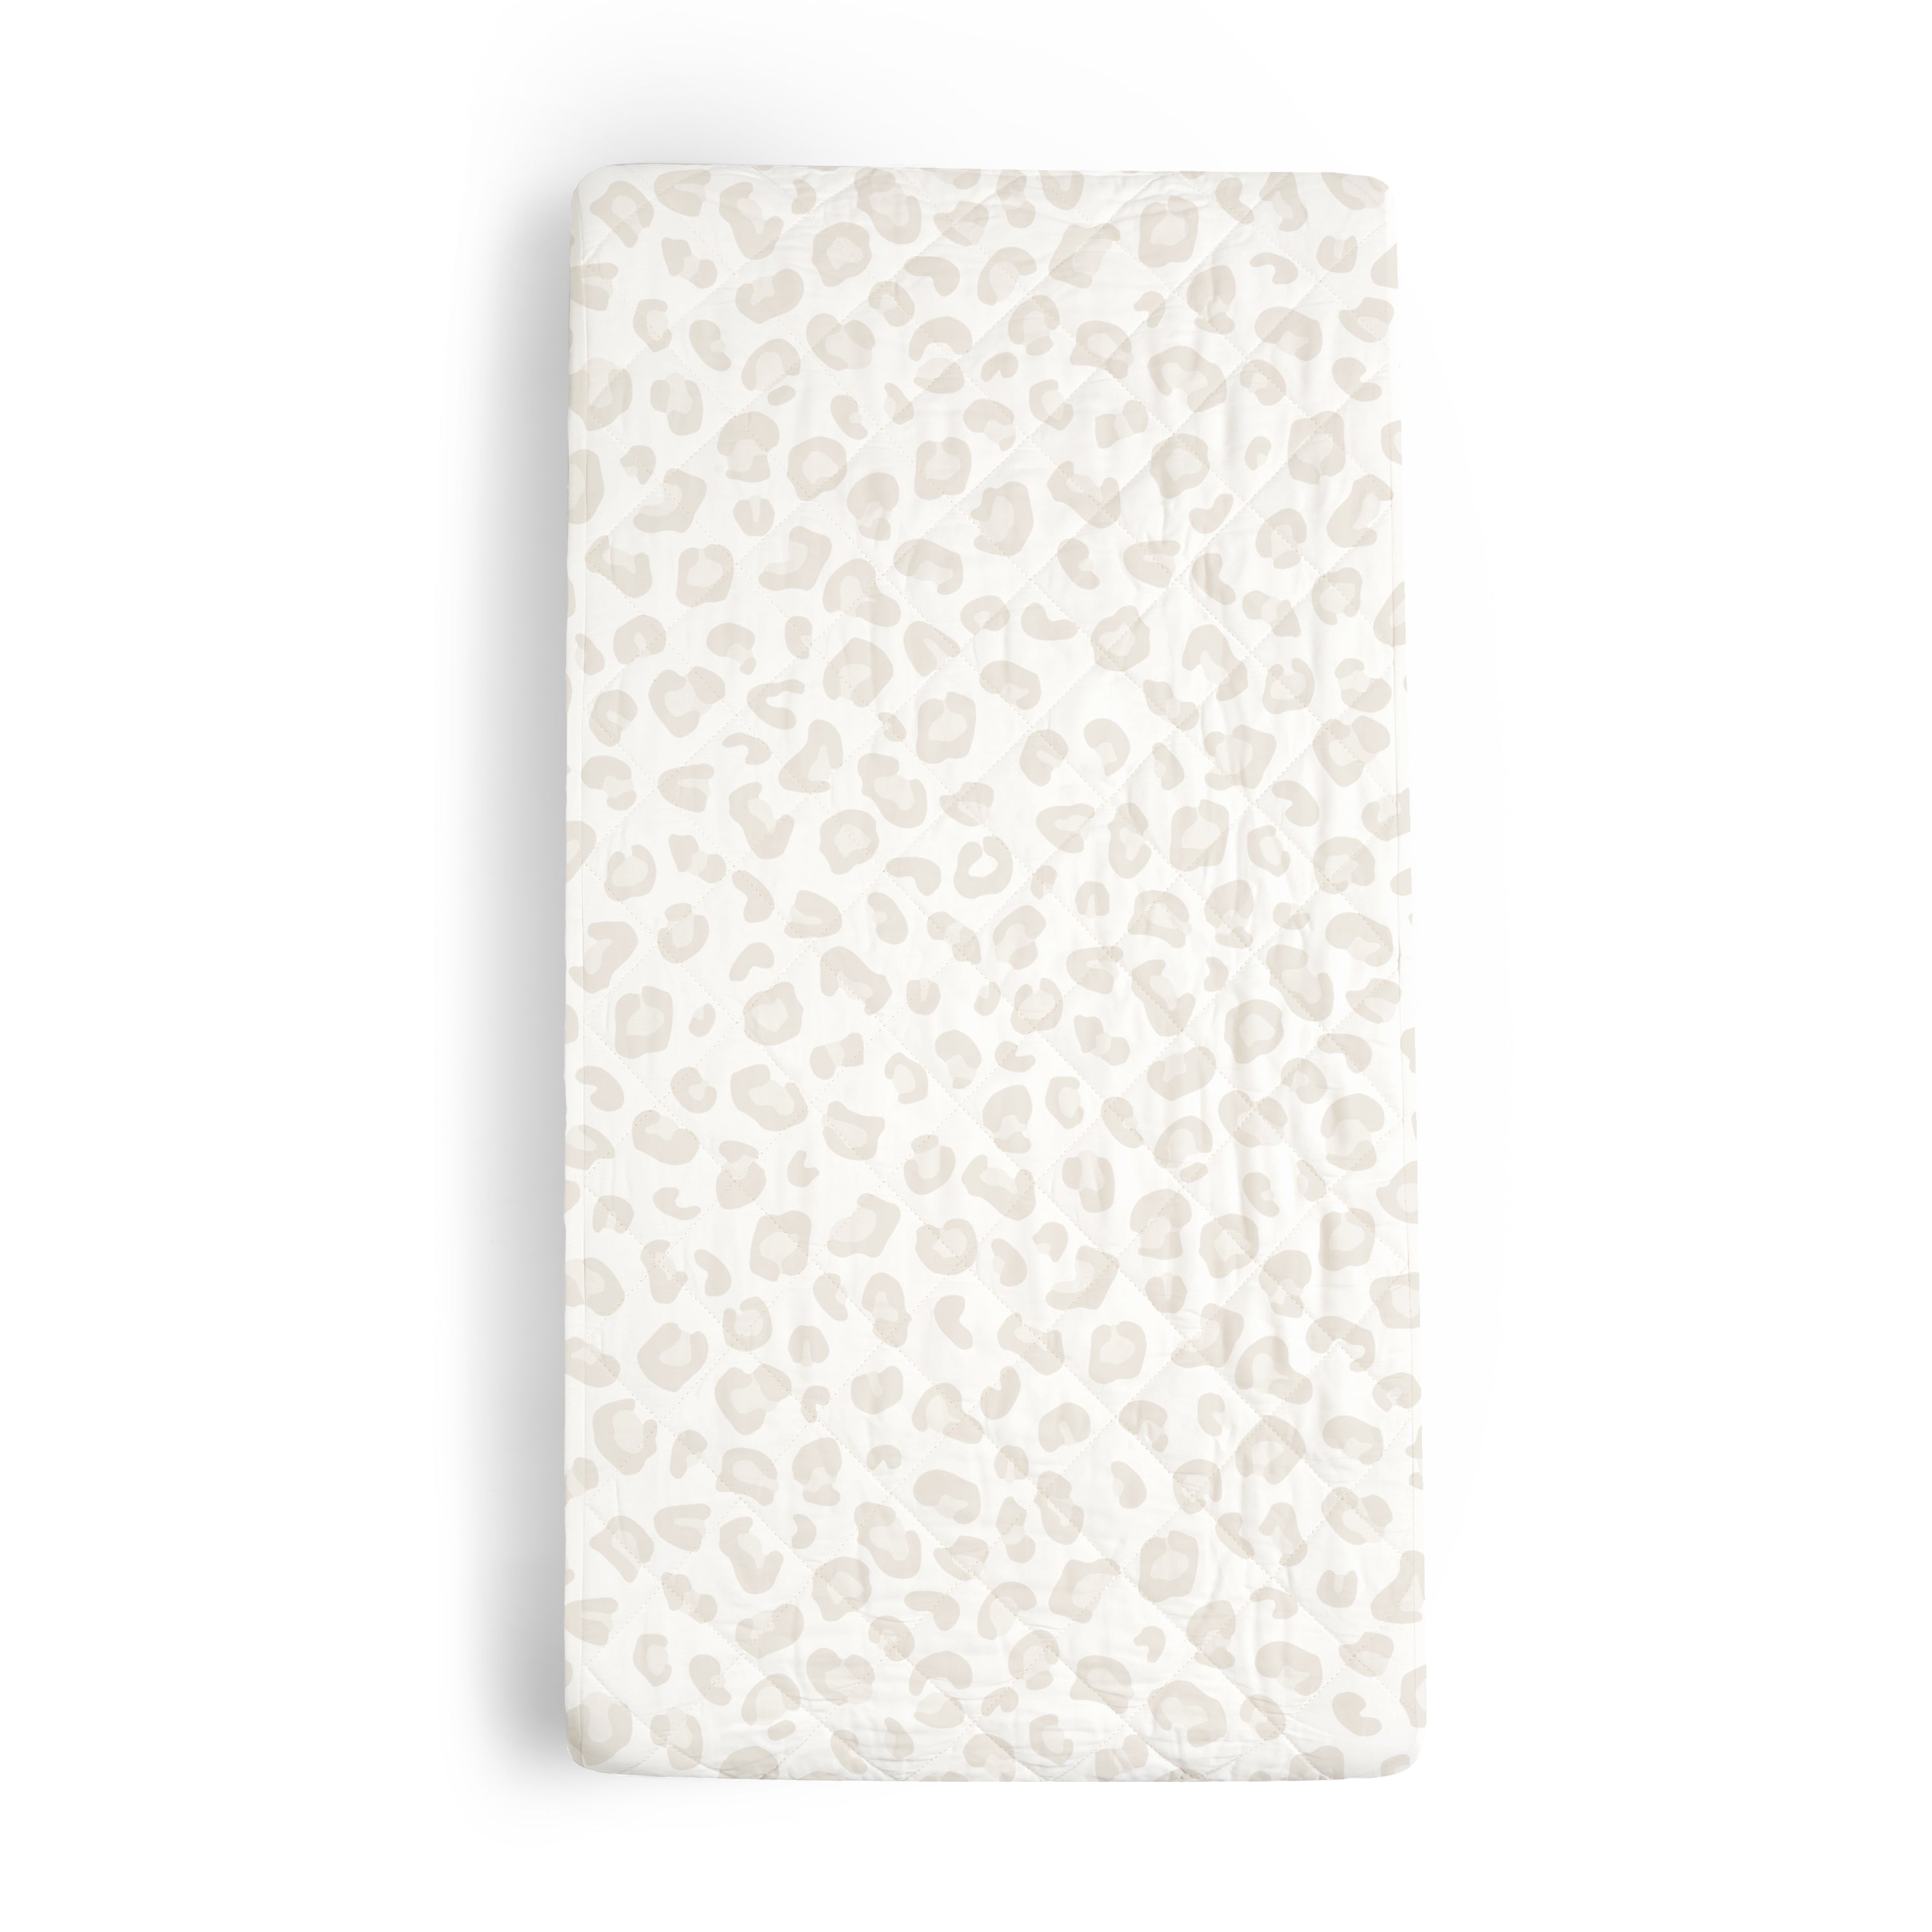 A folded fleece blanket with a subtle grey and white leopard print design, isolated on a white background - the Organic Cotton Changing Pad Cover - Wild by Makemake Organics.